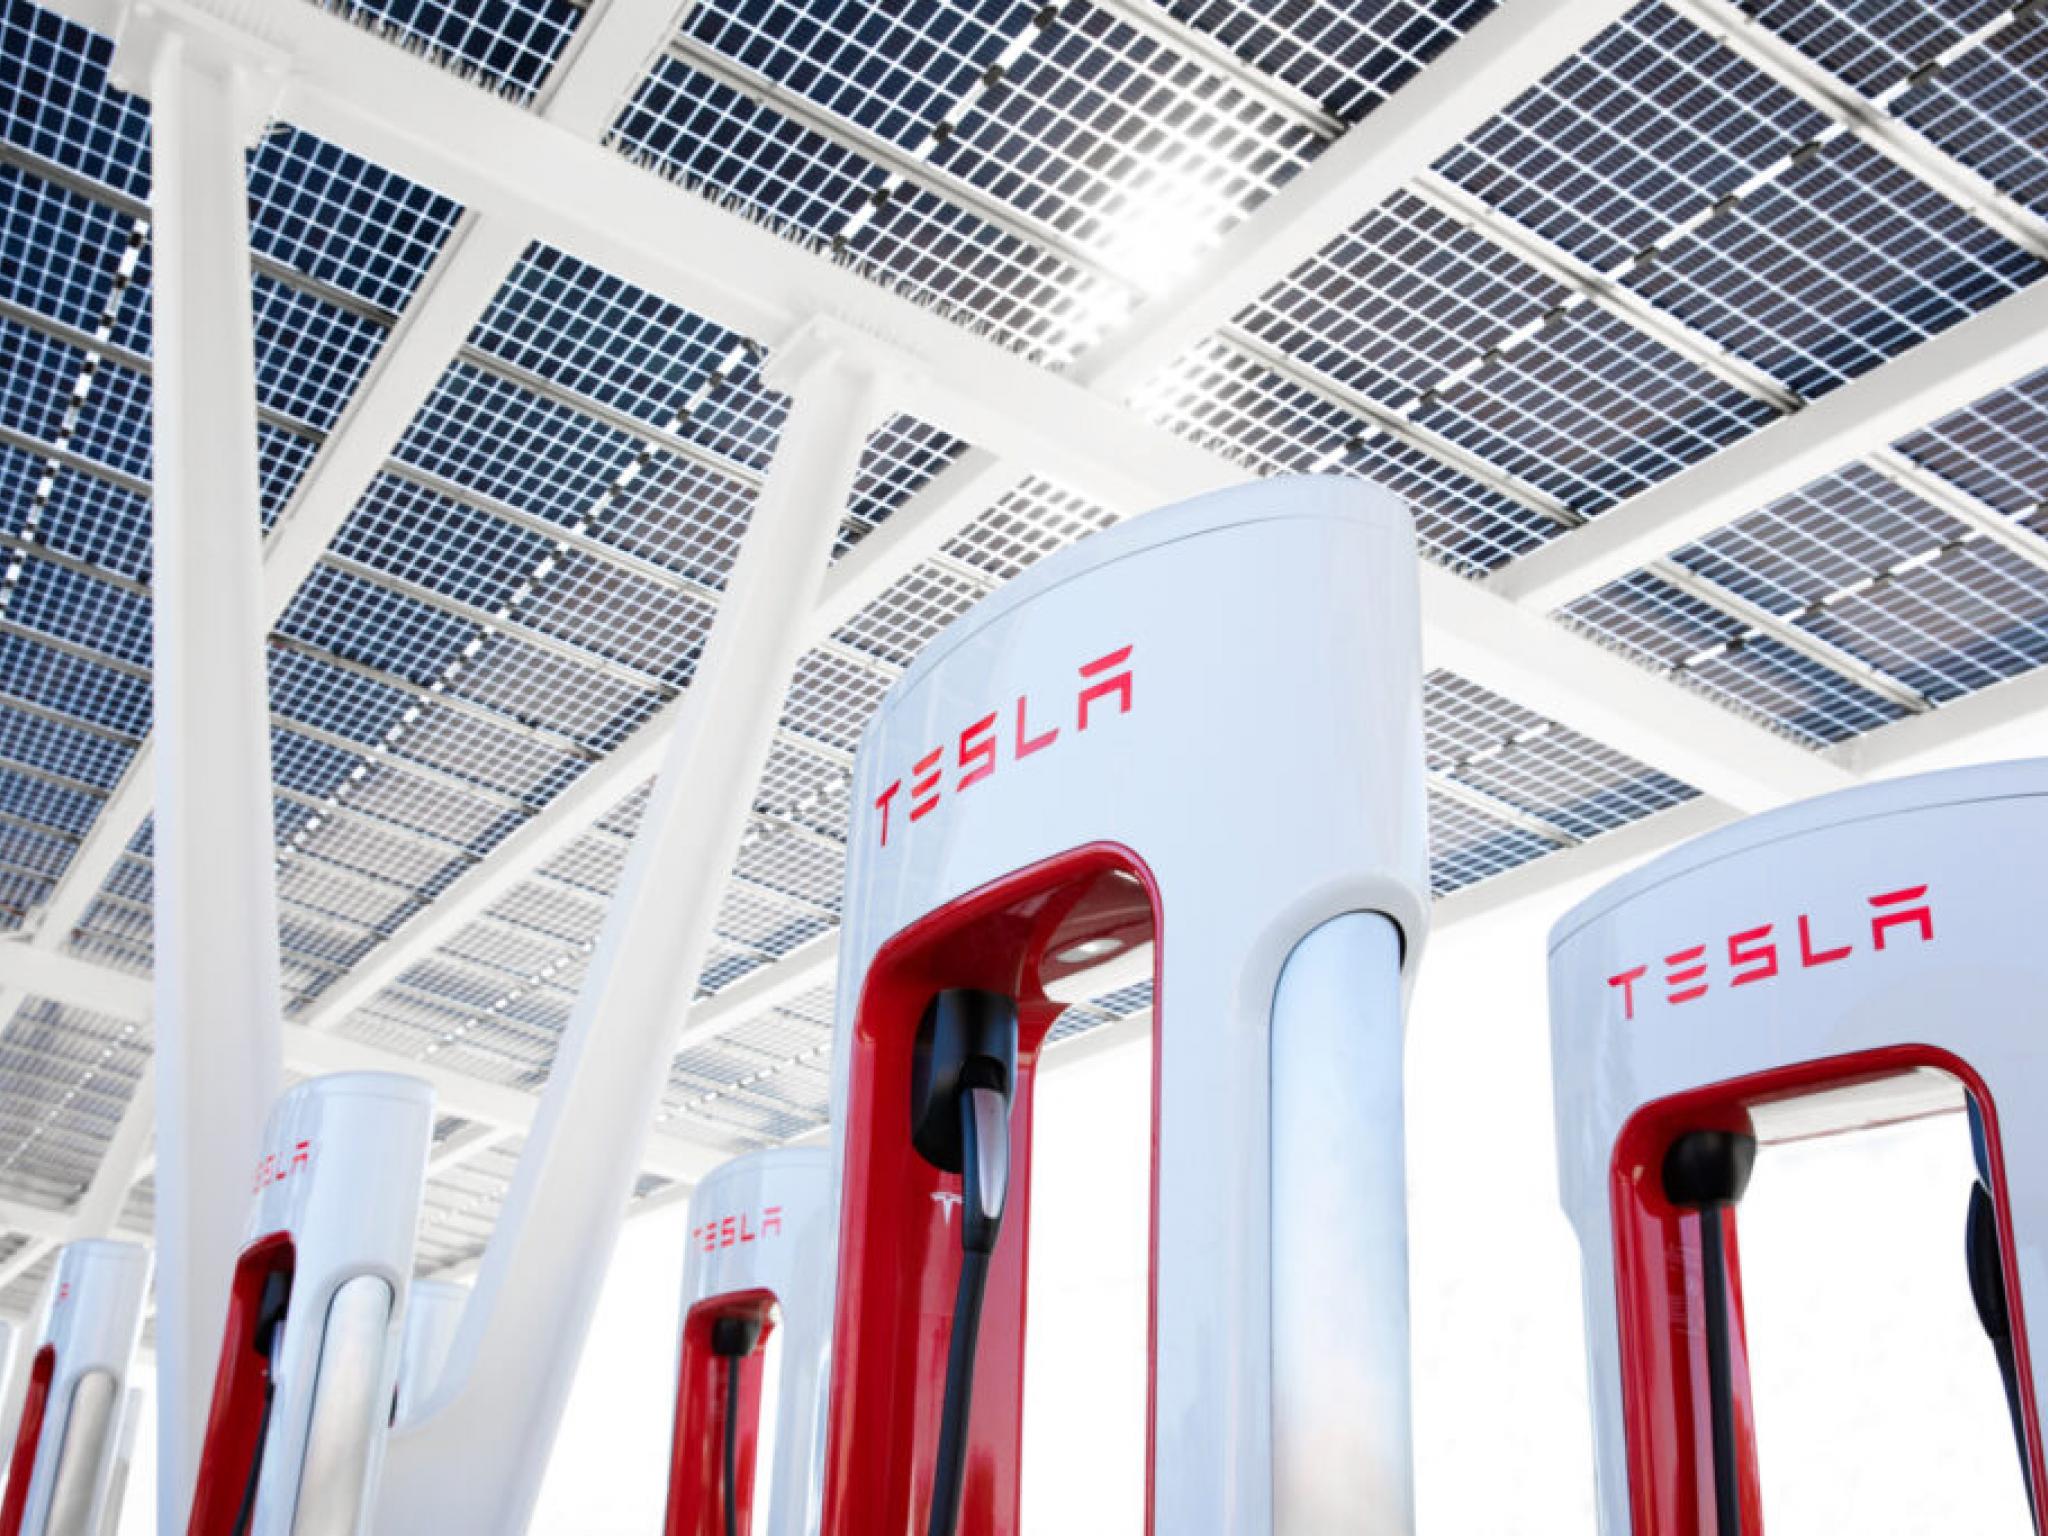  tesla-issues-warning-against-using-wet-towels-to-speed-up-supercharging 